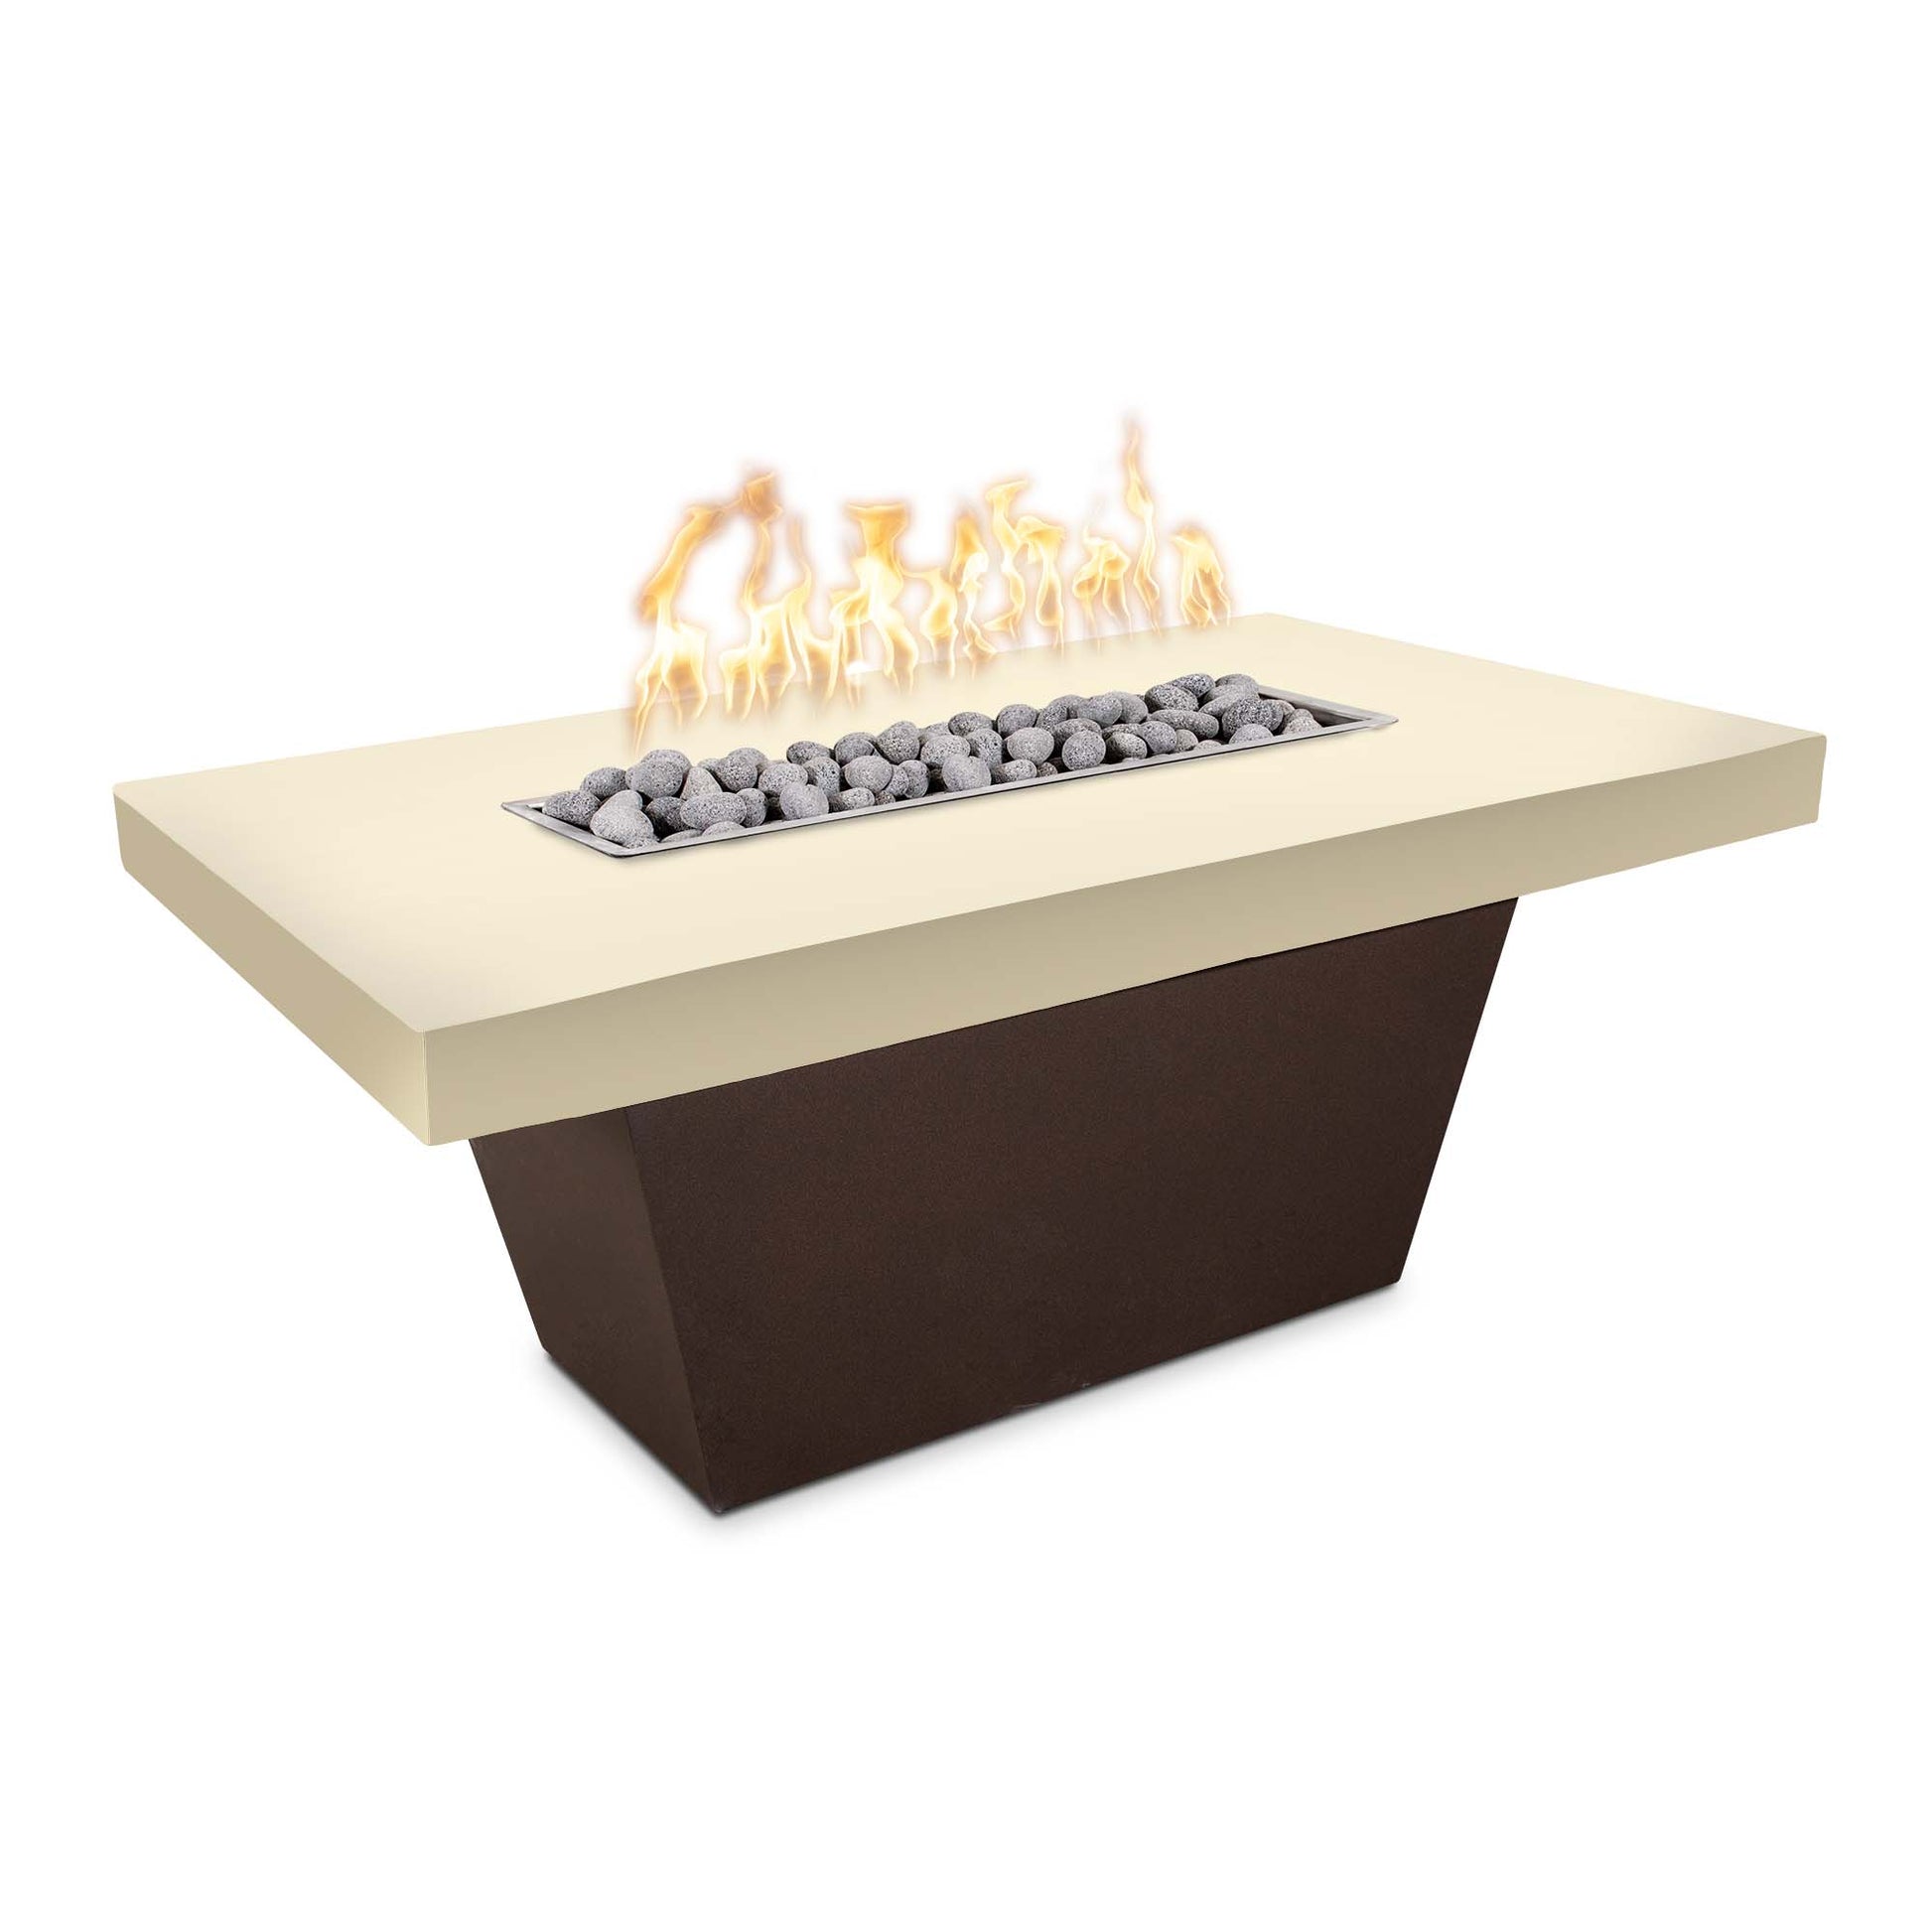 The Outdoor Plus Tacoma 48" Natural Gray Concrete Top & Copper Vein Powder Coated Base Natural Gas Fire Table with Flame Sense with Spark Ignition